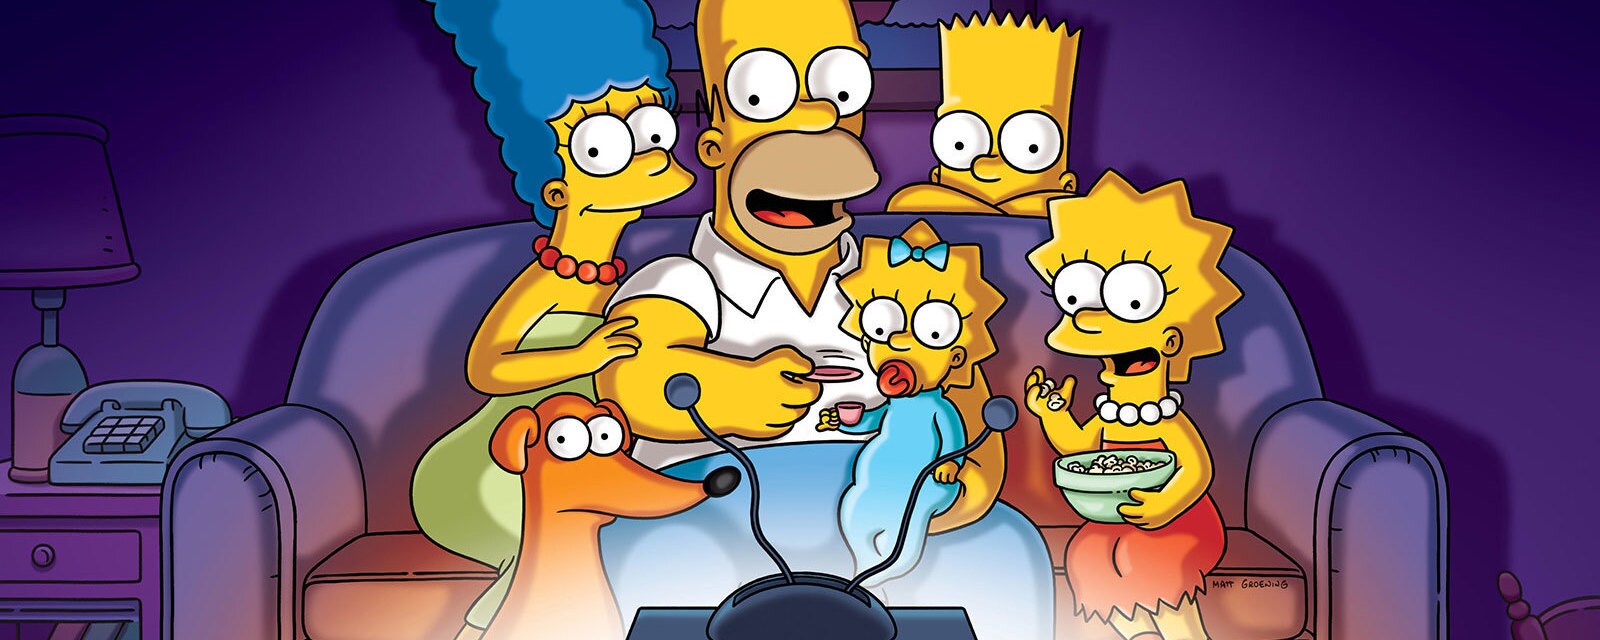 It S Official The Simpsons Are Coming To Disney On November 12 Disney News